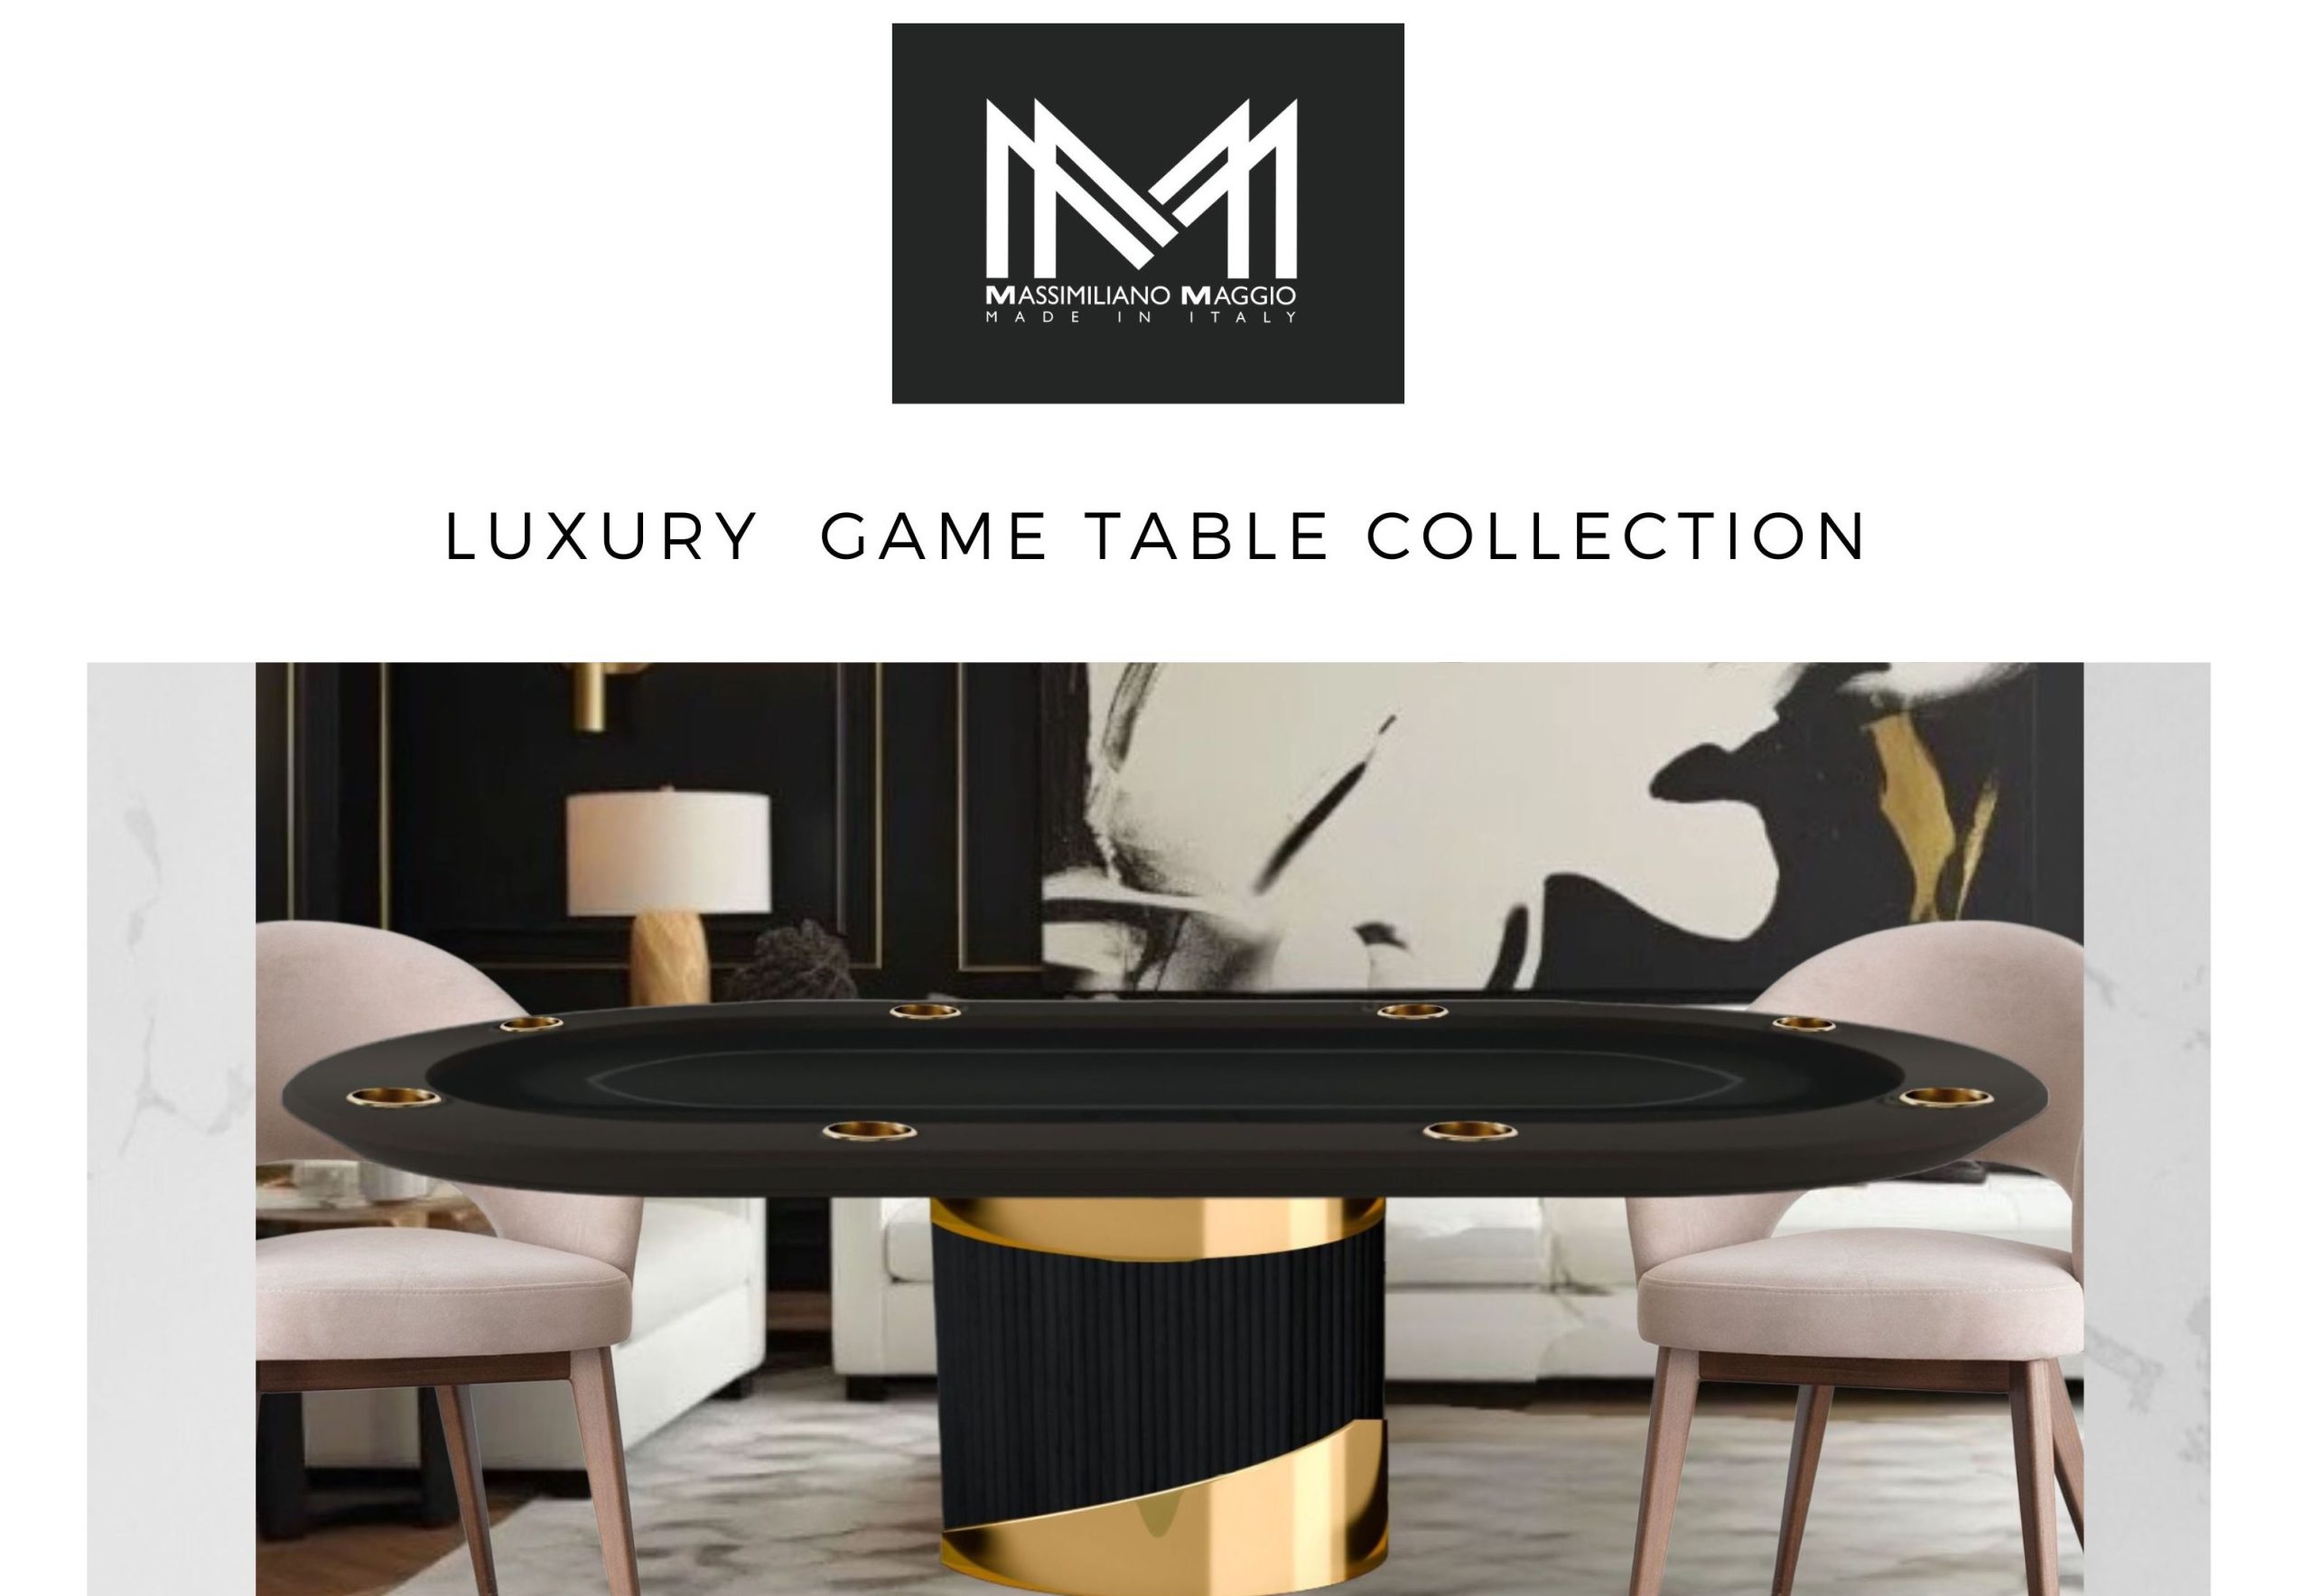 Luxury Game Tables Collection Massimiliano Maggio Made in Italy